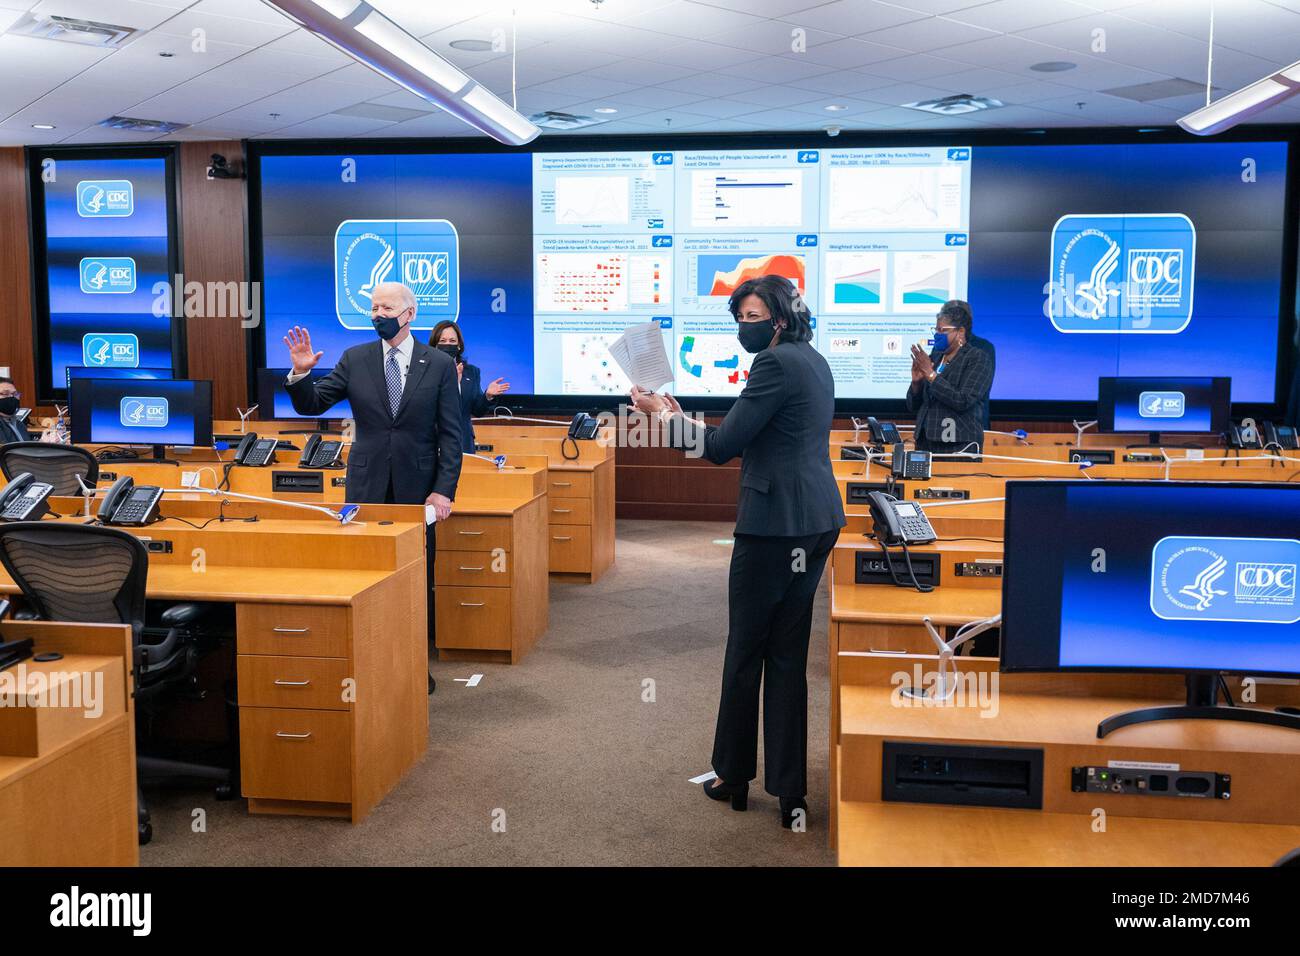 Reportage: President Joe Biden, joined by Vice President Kamala Harris and Director of the Centers for Disease Control (CDC) Dr. Rochelle Walensky, talks with CDC staff during a briefing Friday, March 19, 2021, at the CDC headquarters in Atlanta. Stock Photo